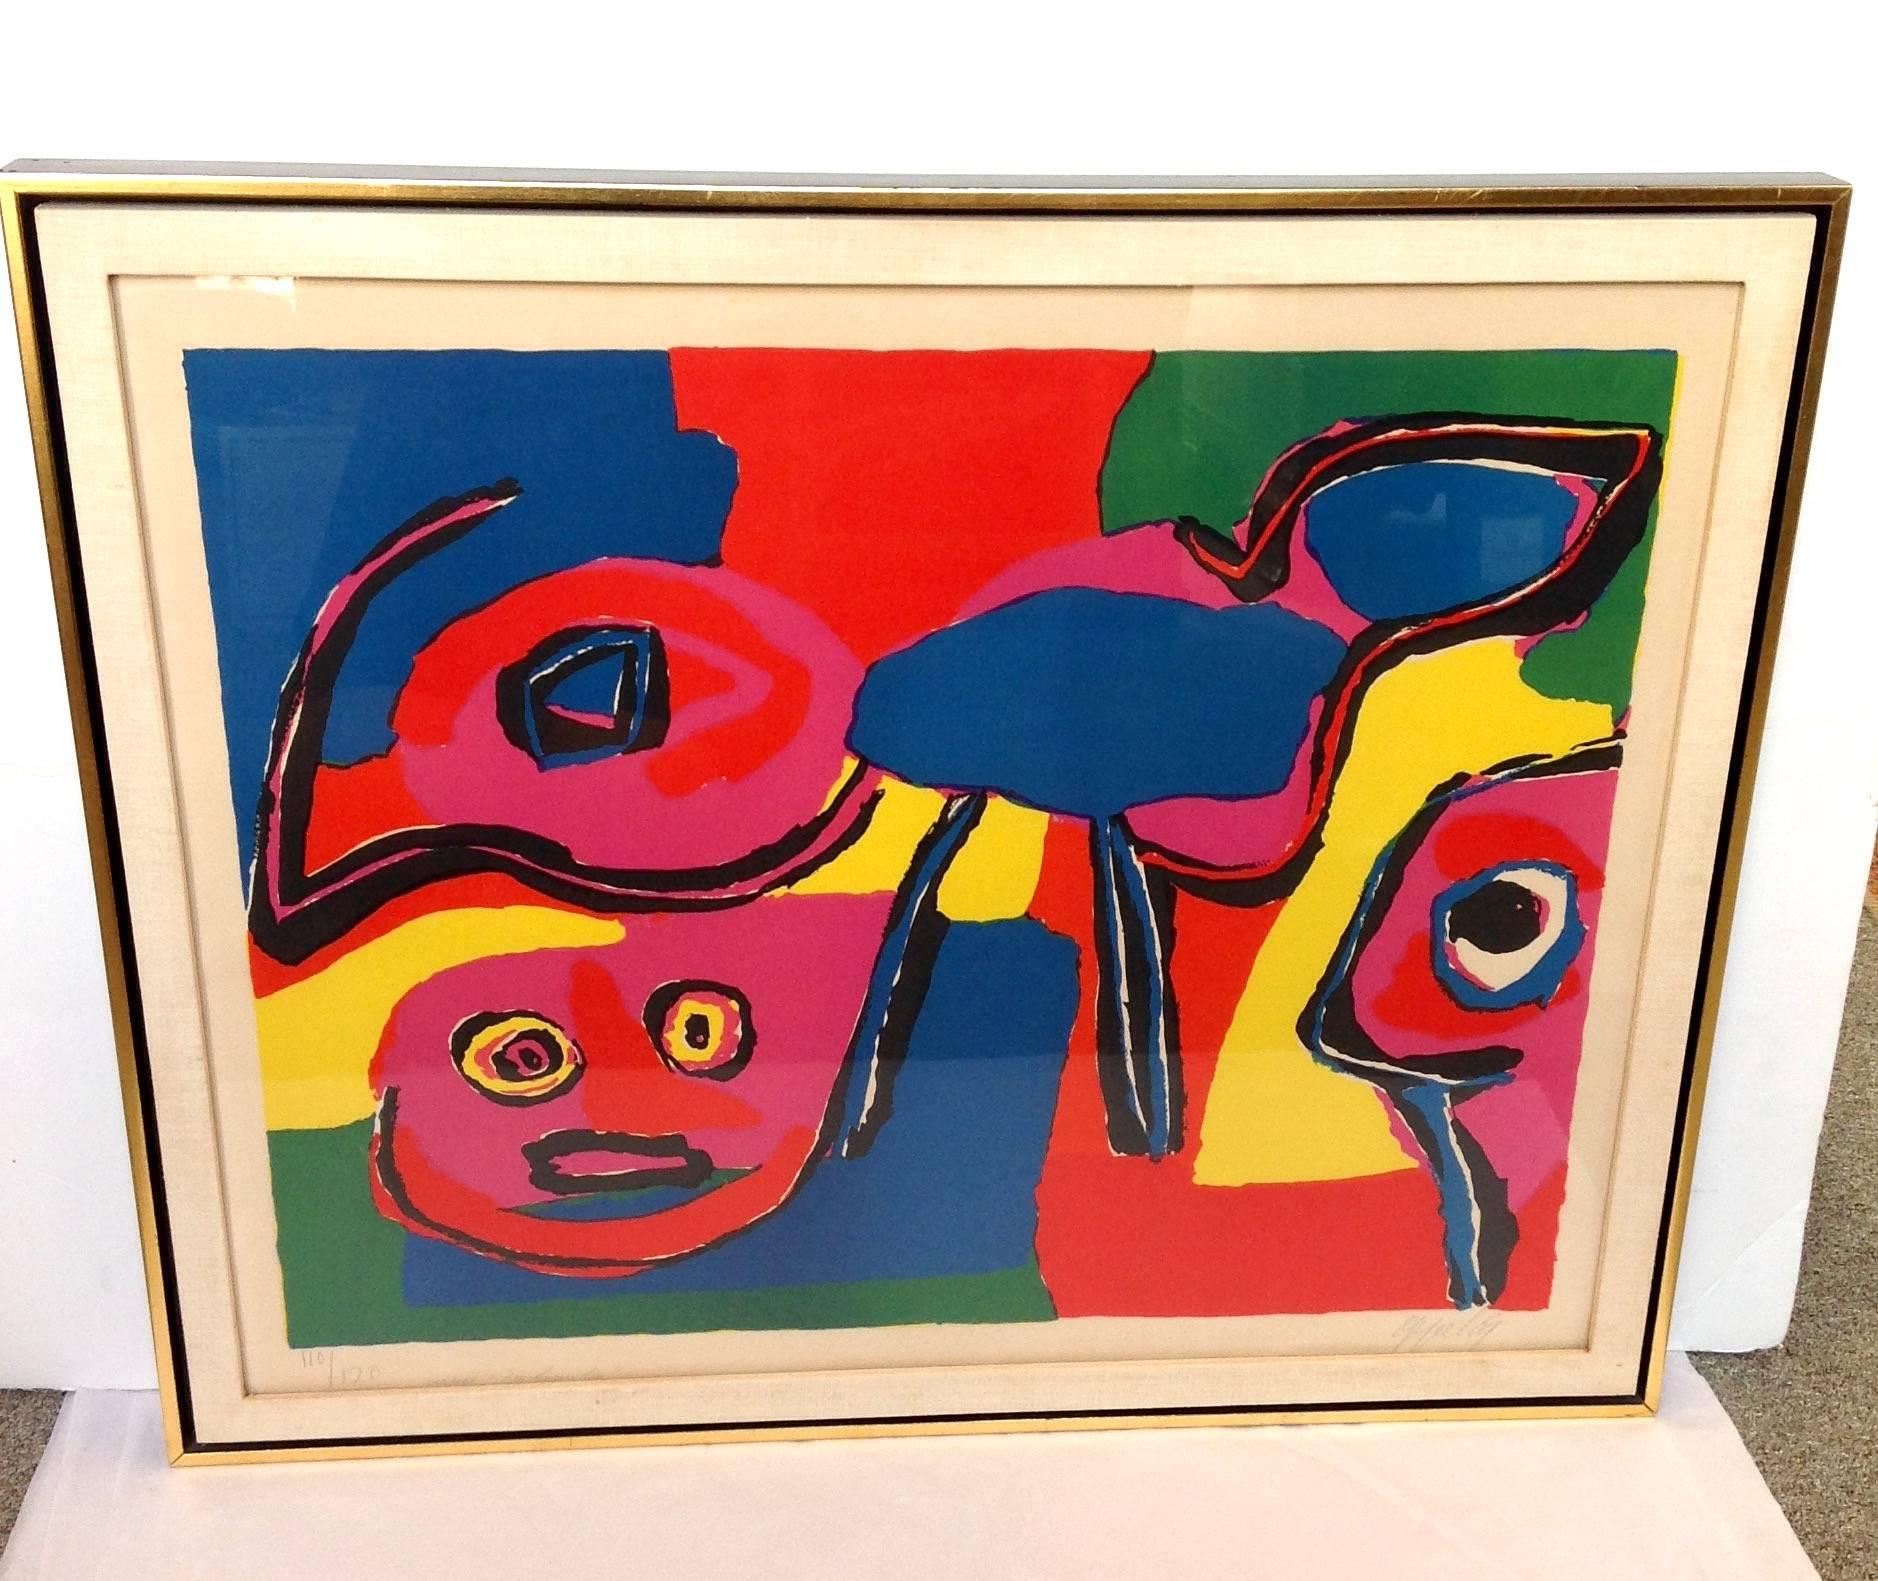 Dutch artist Karel Appel color lithograph on paper, 110/120, pencil signed and titled in the lower margins. It is in a wood frame with linen mat.